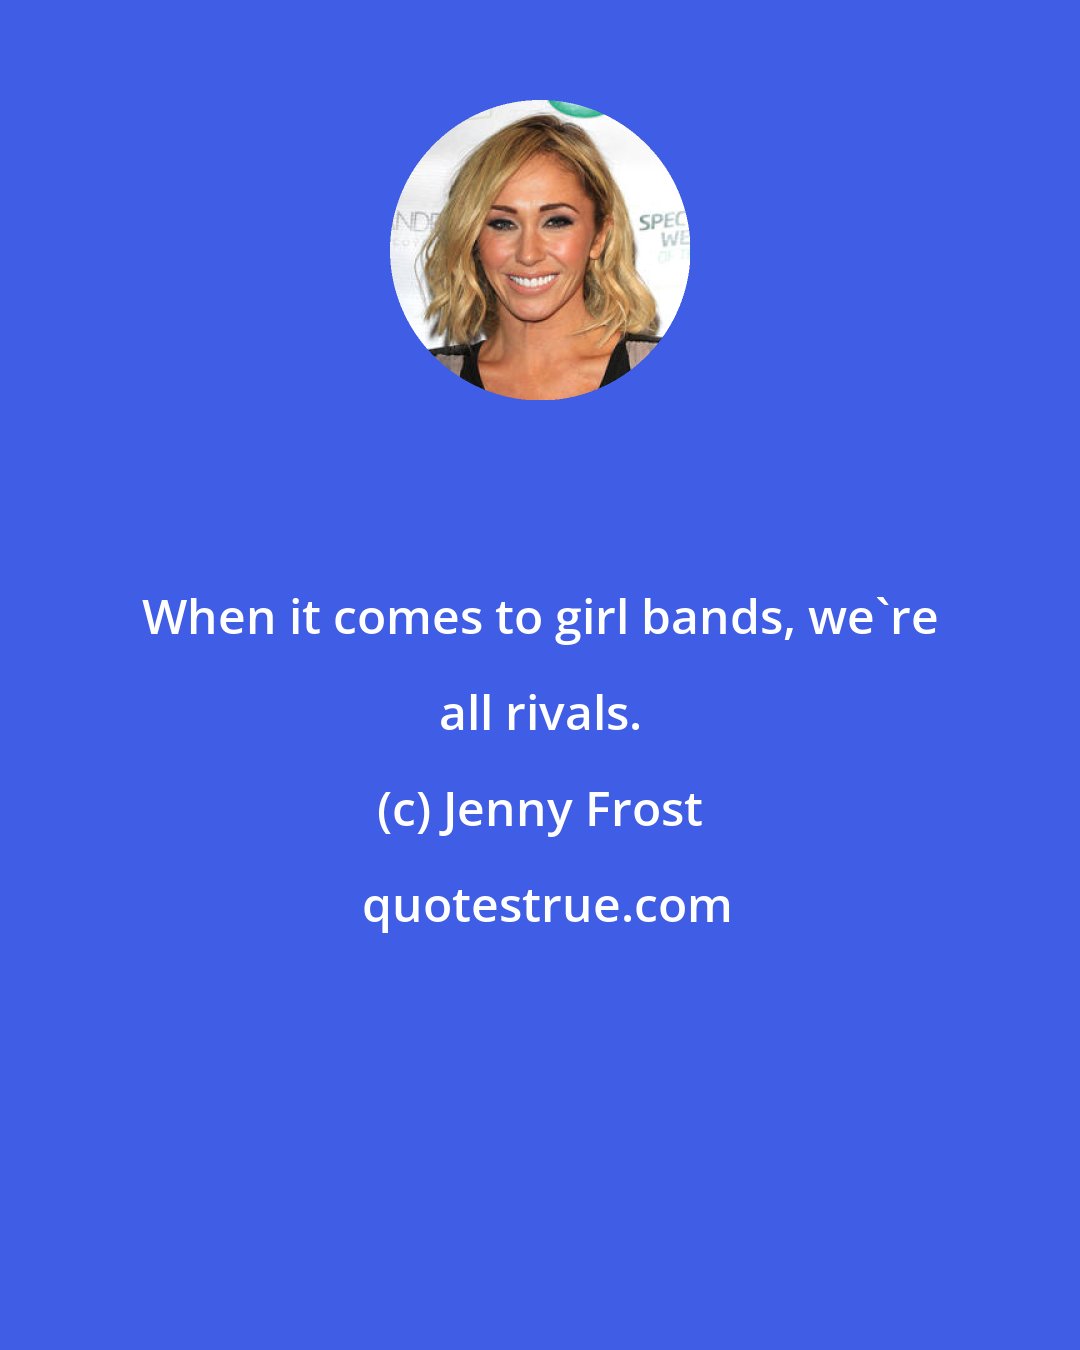 Jenny Frost: When it comes to girl bands, we're all rivals.